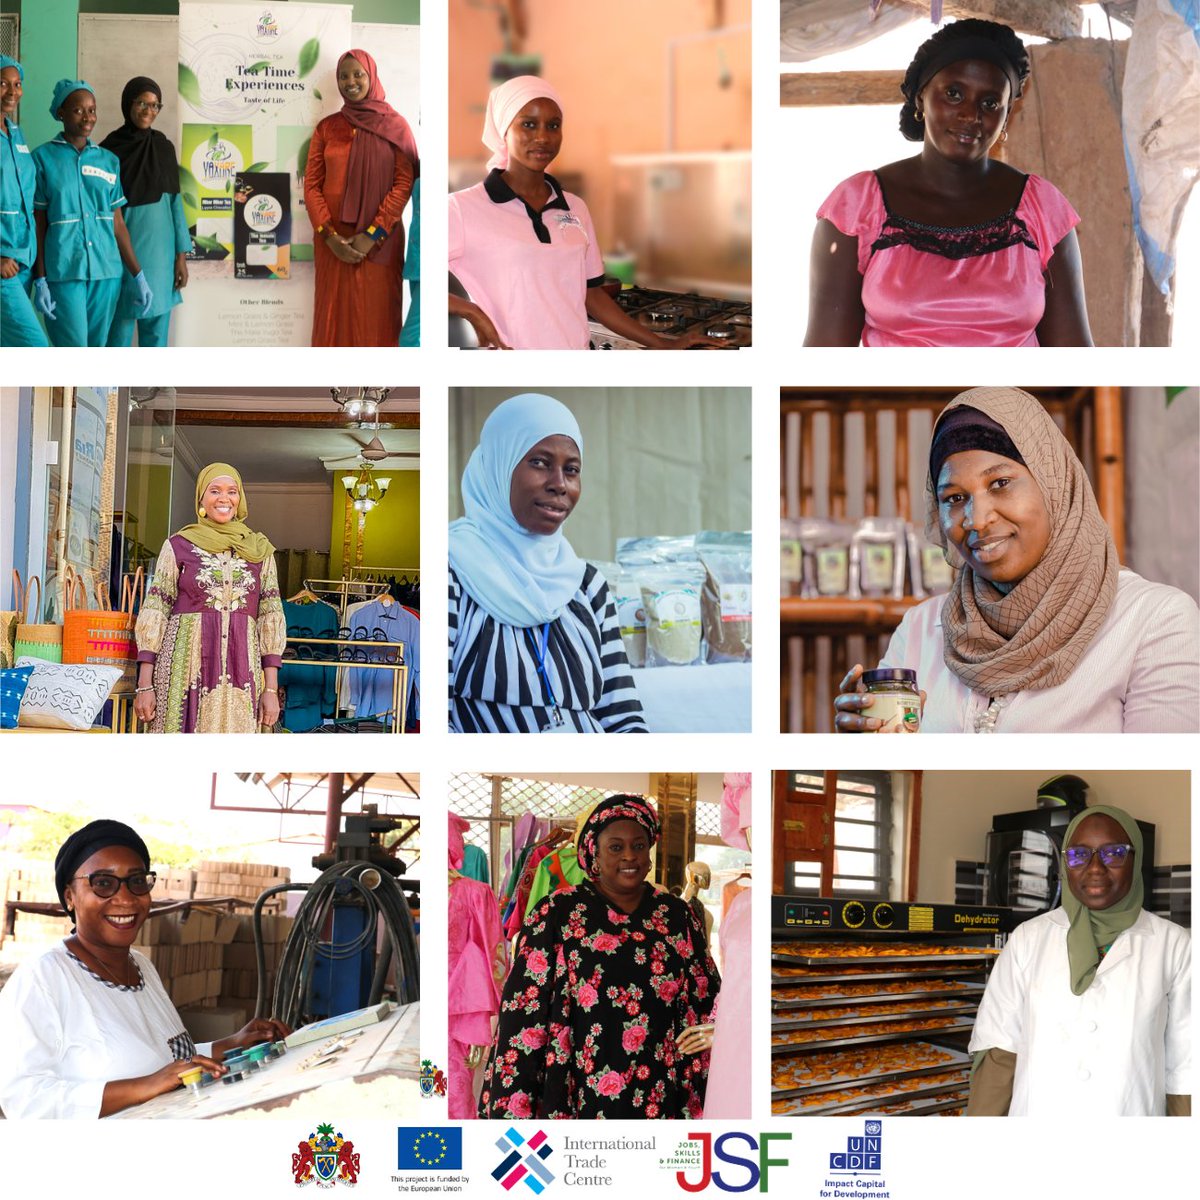 Through the @EUinTheGambia- funded Jobs, Skills and Finance Programme for Youth and Women, together with @UNCDF, we awarded grants to 18 women entrepreneurs in The Gambia. The support is helping them to expand operations and create jobs. Read more: bit.ly/49UEMdX